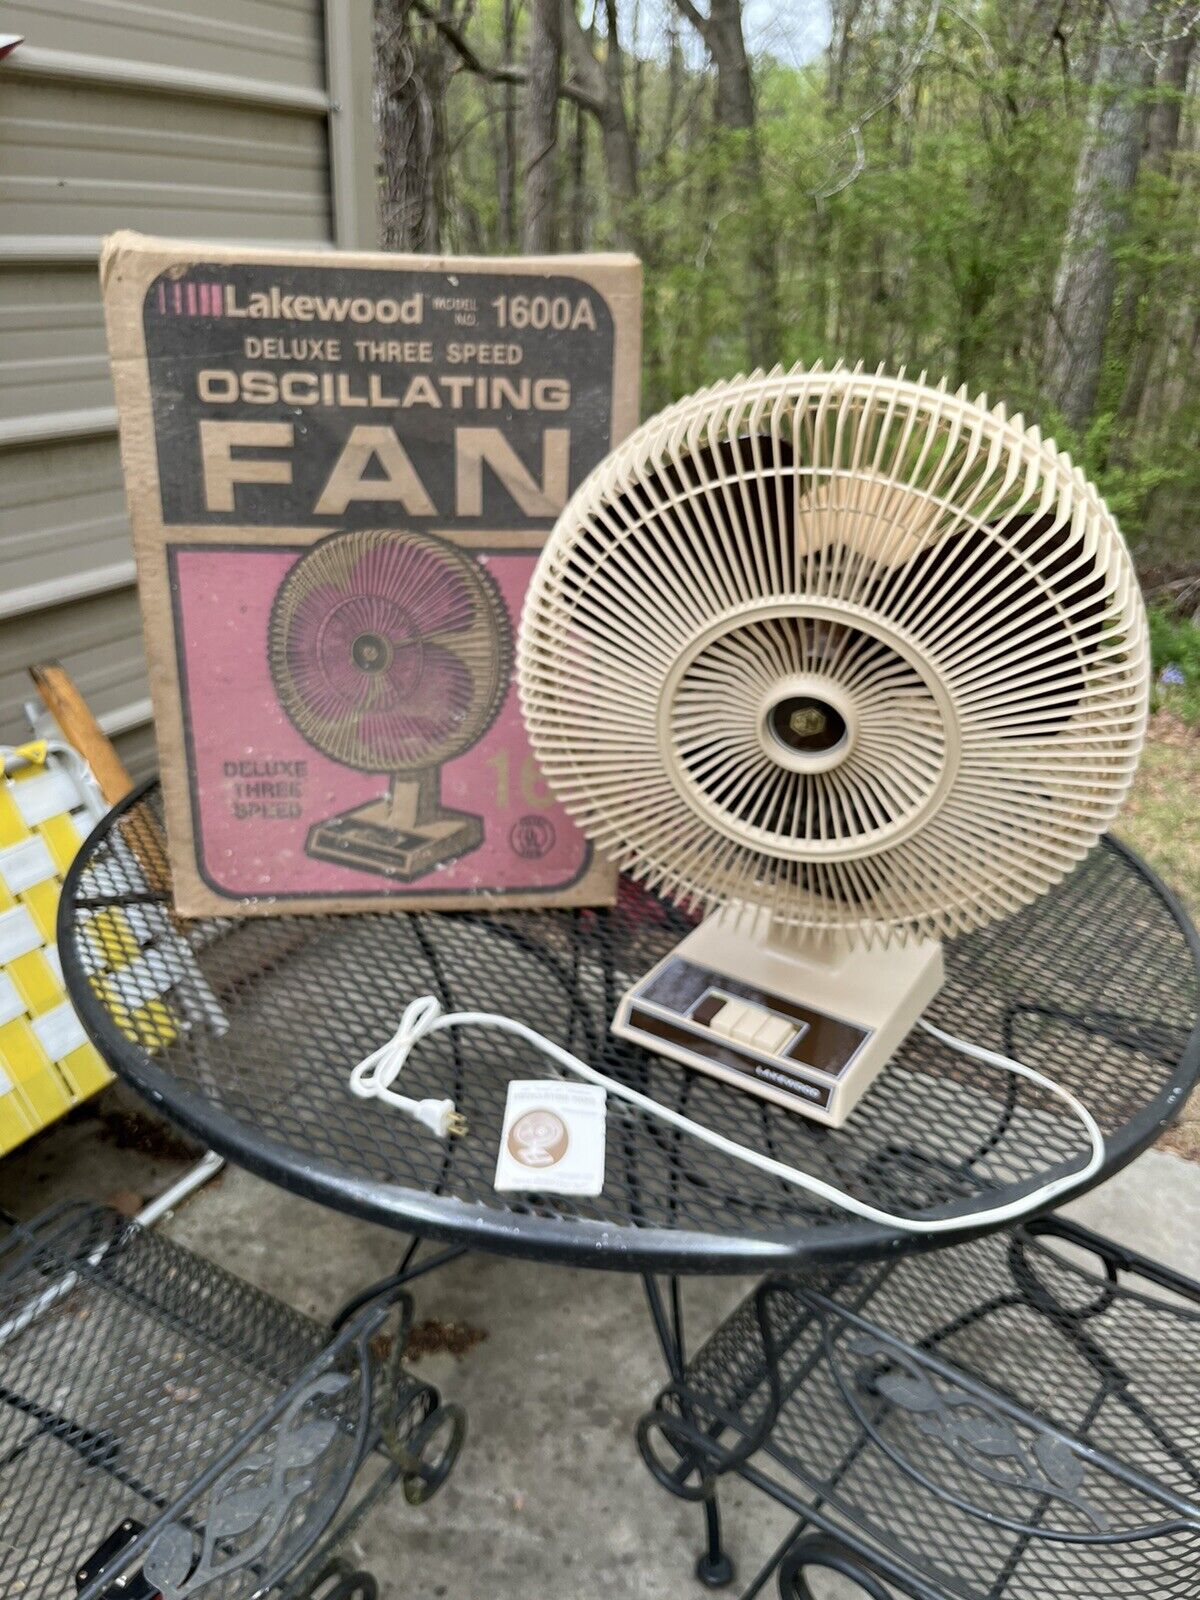 BRAND NEW OLD  STOCK IN BOX Lakewood 1500A Vintage Fan oscillating 1600A Box